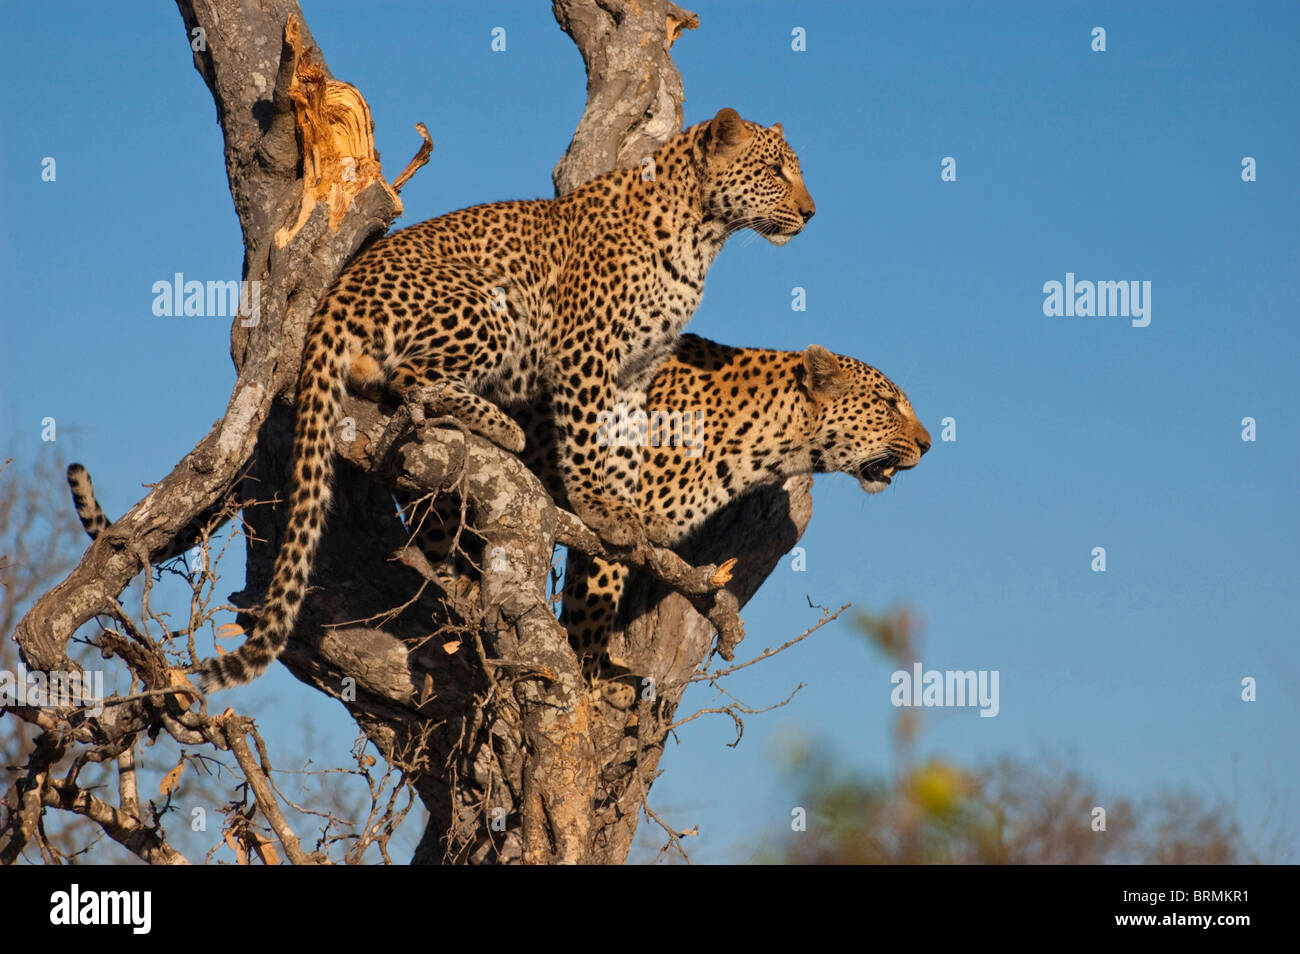 Leopards side by side in a dry tree trunk Stock Photo